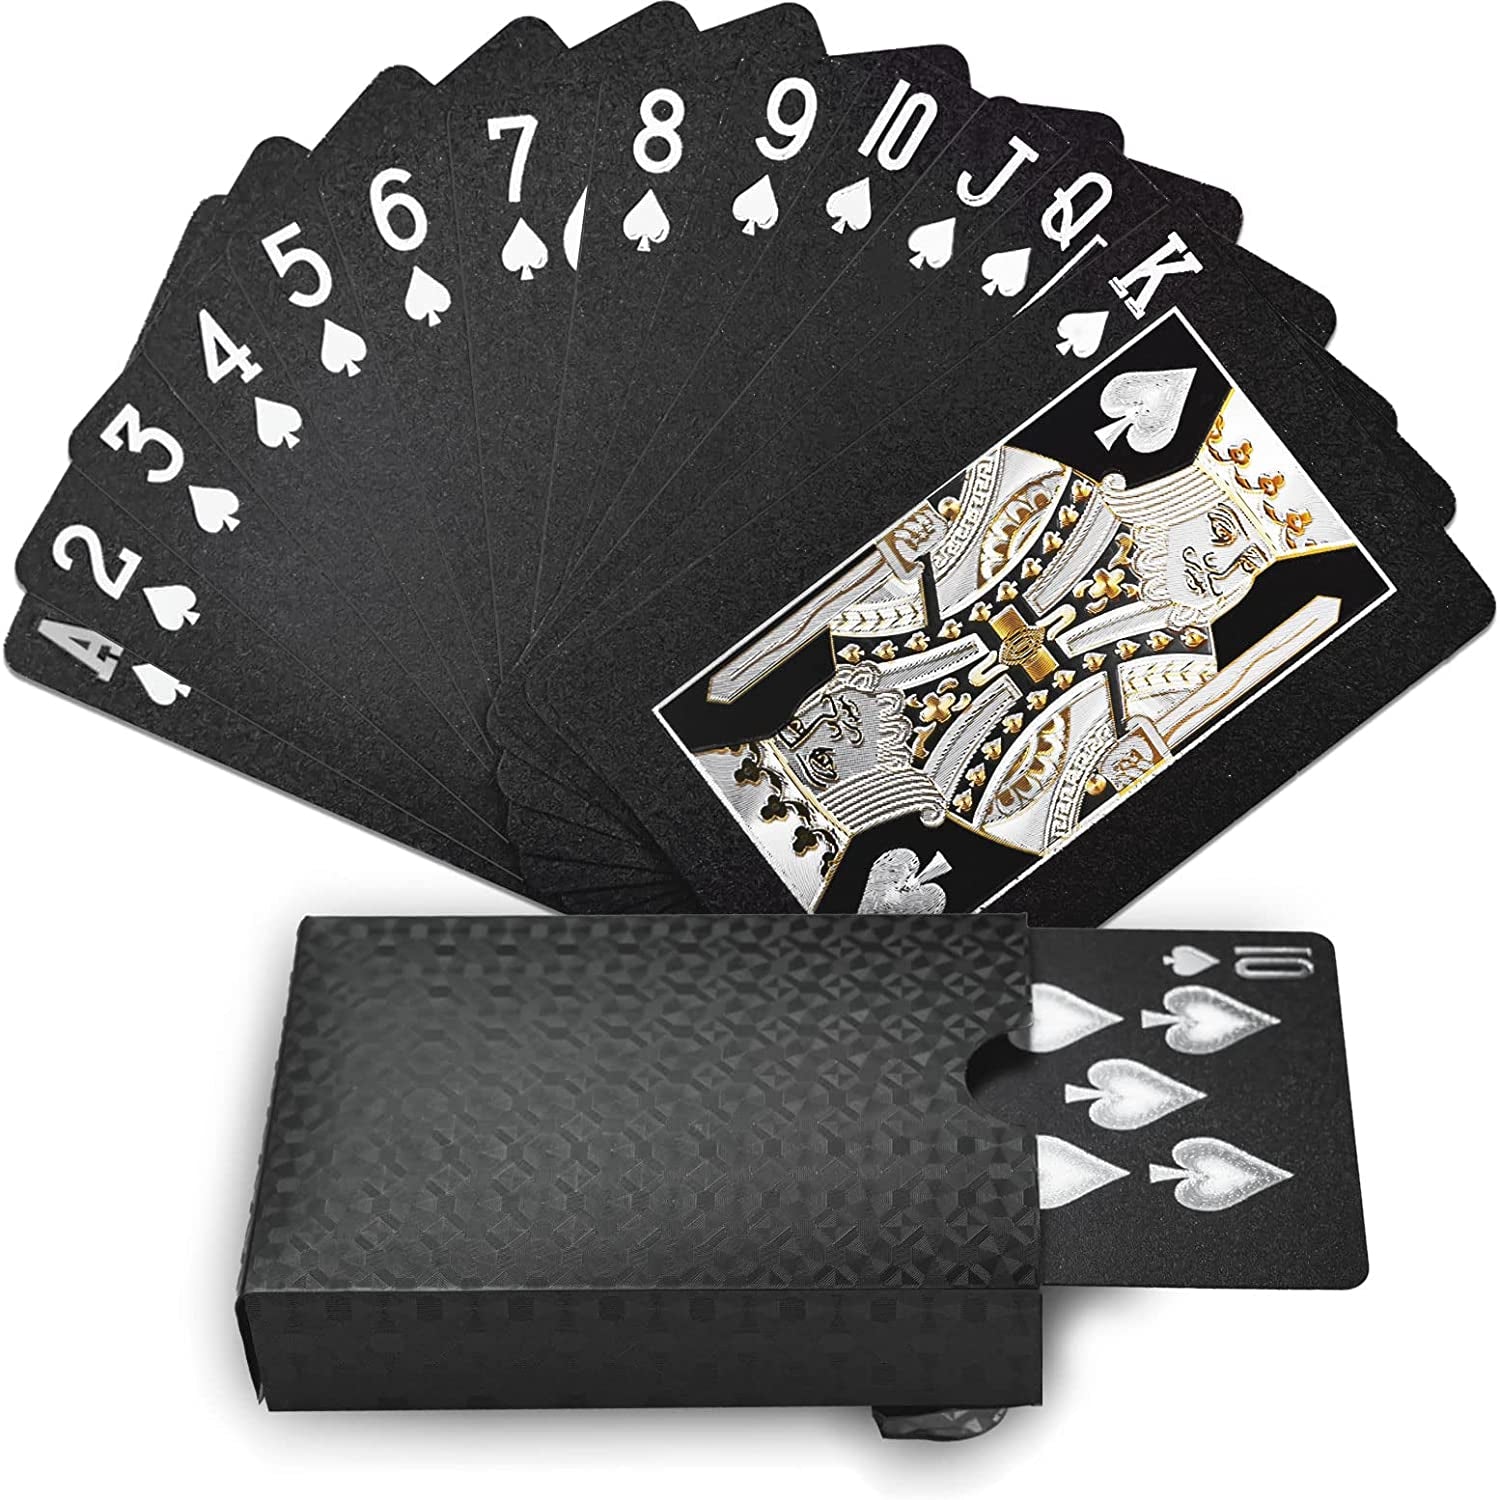 Black Playing Cards , Waterproof Poker Cards, PET Playing Cards with Box Suitable for Pool, Beach, Camping, Party, Family or Friend Card Games